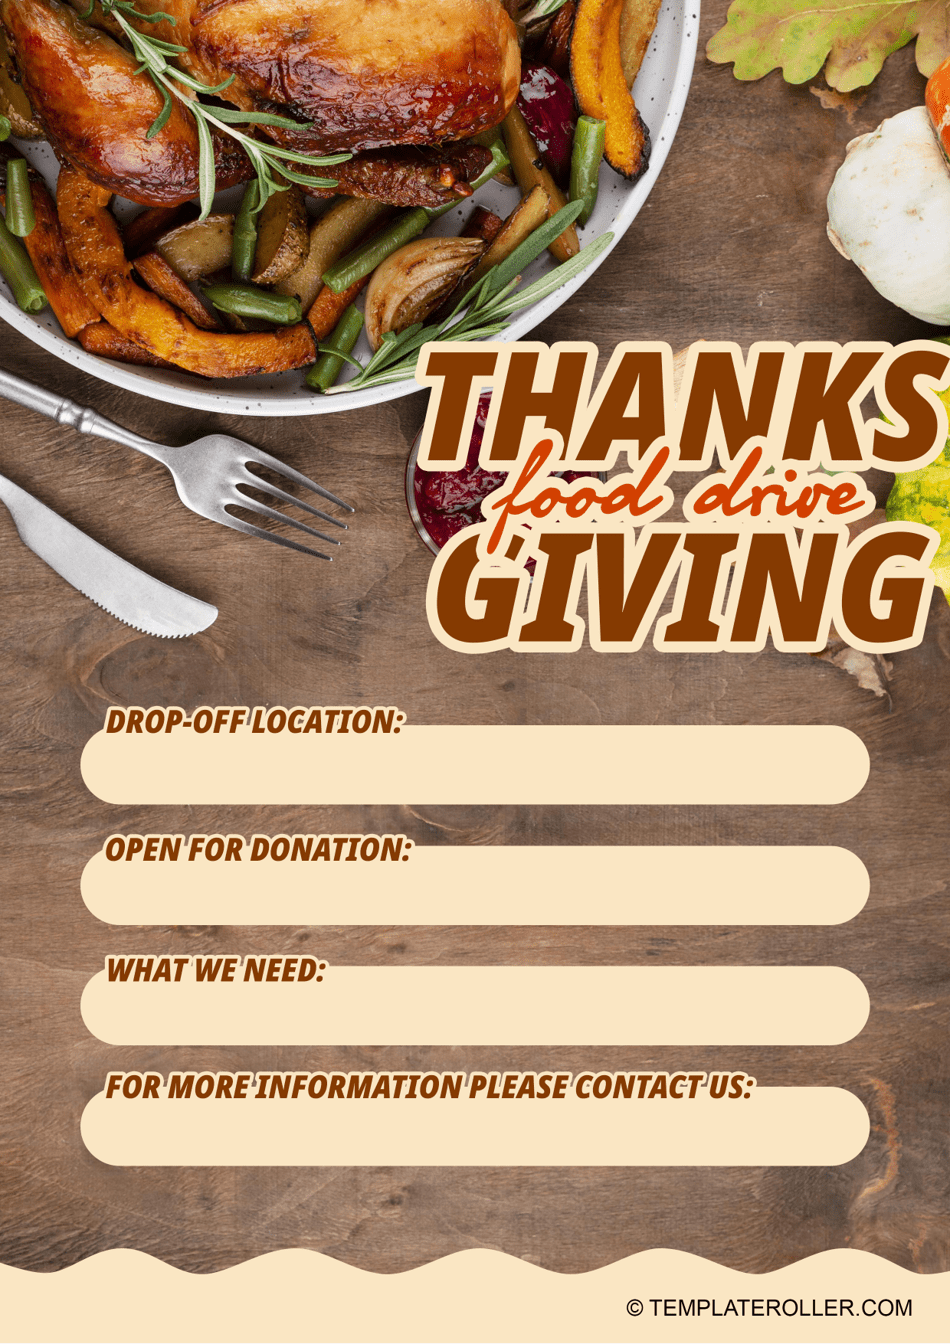 Thanksgiving Food Drive Flyer with Interesting Design Featuring Various Tasty Meals